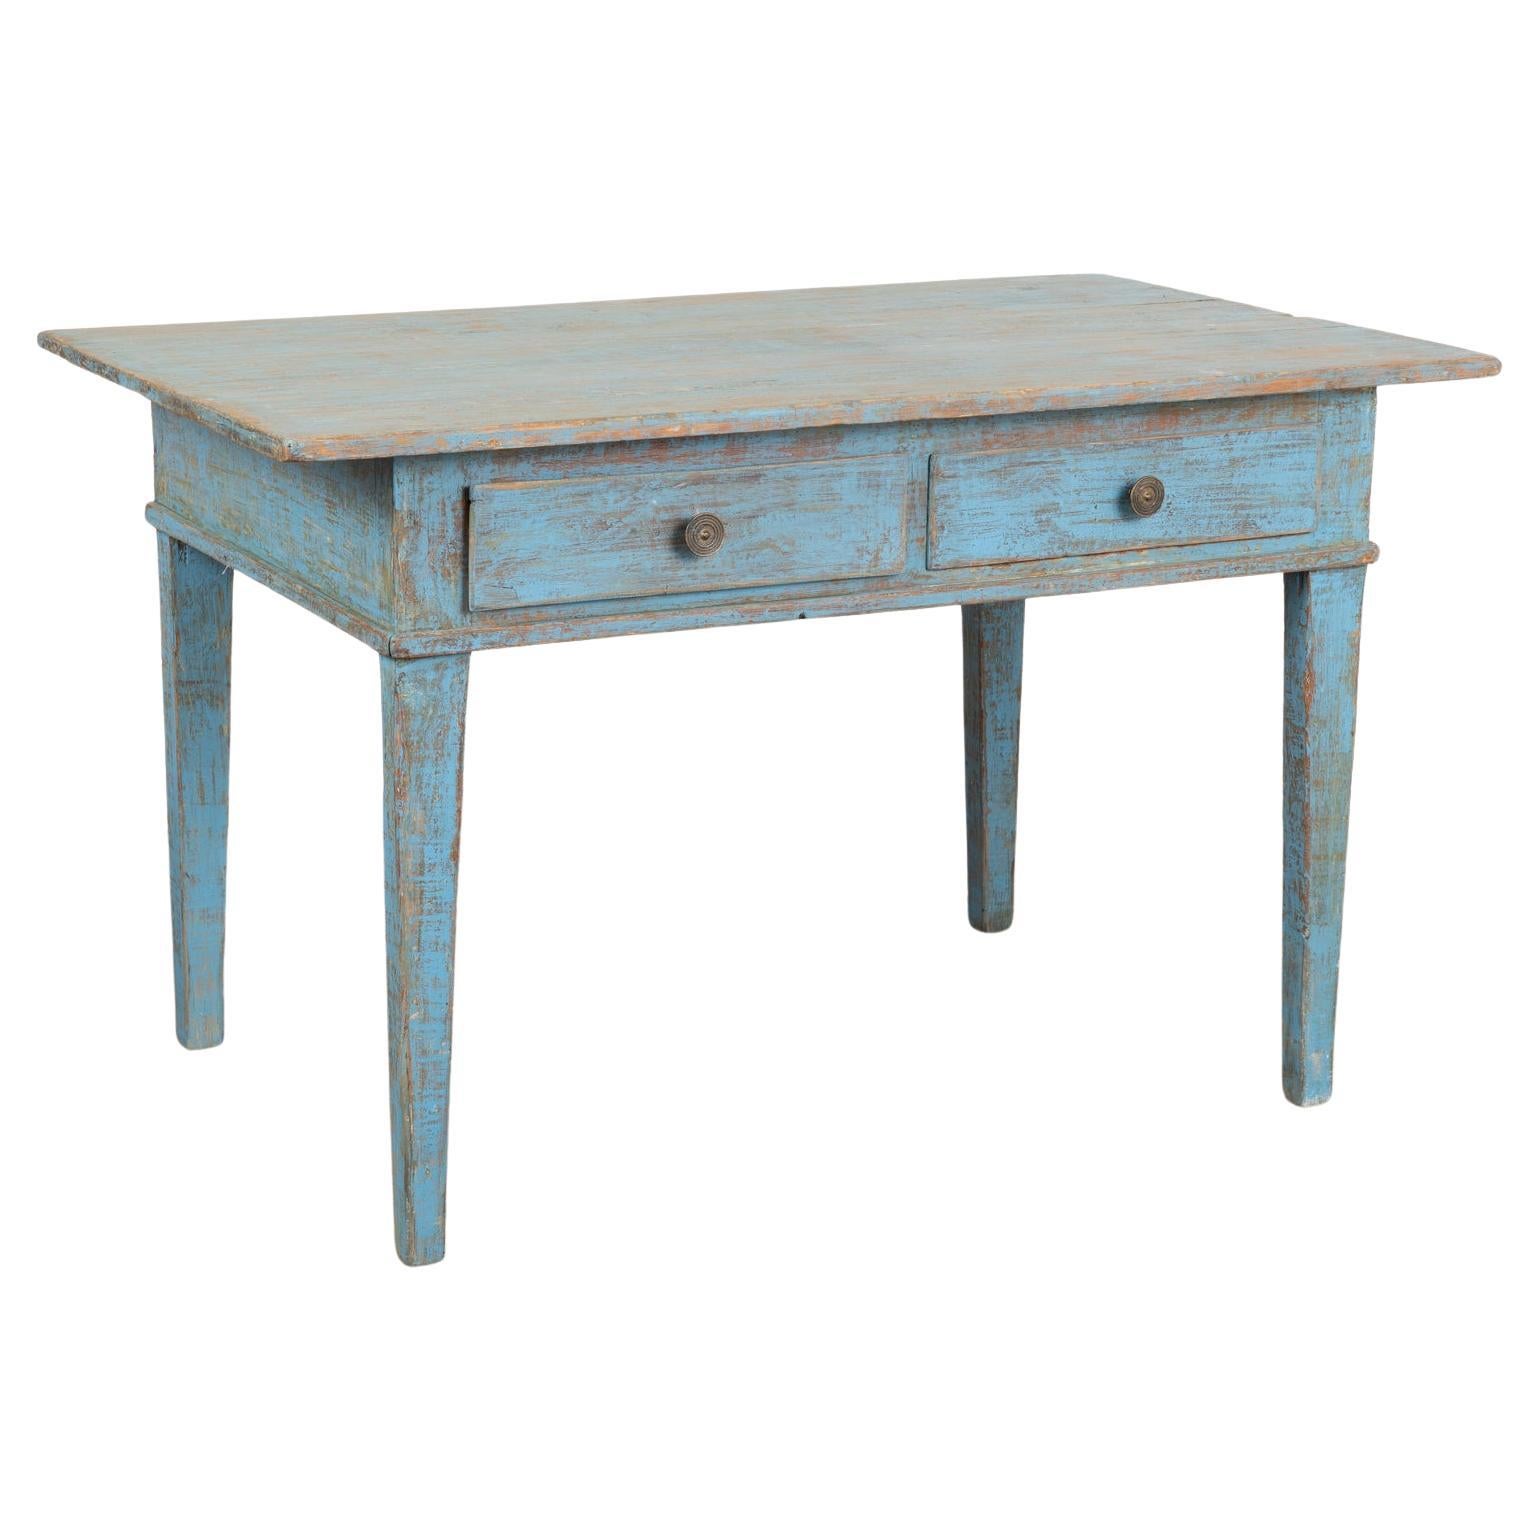 Blue Painted Pine Farm Table Writing Table With 2 Drawers, Sweden circa 1860-80